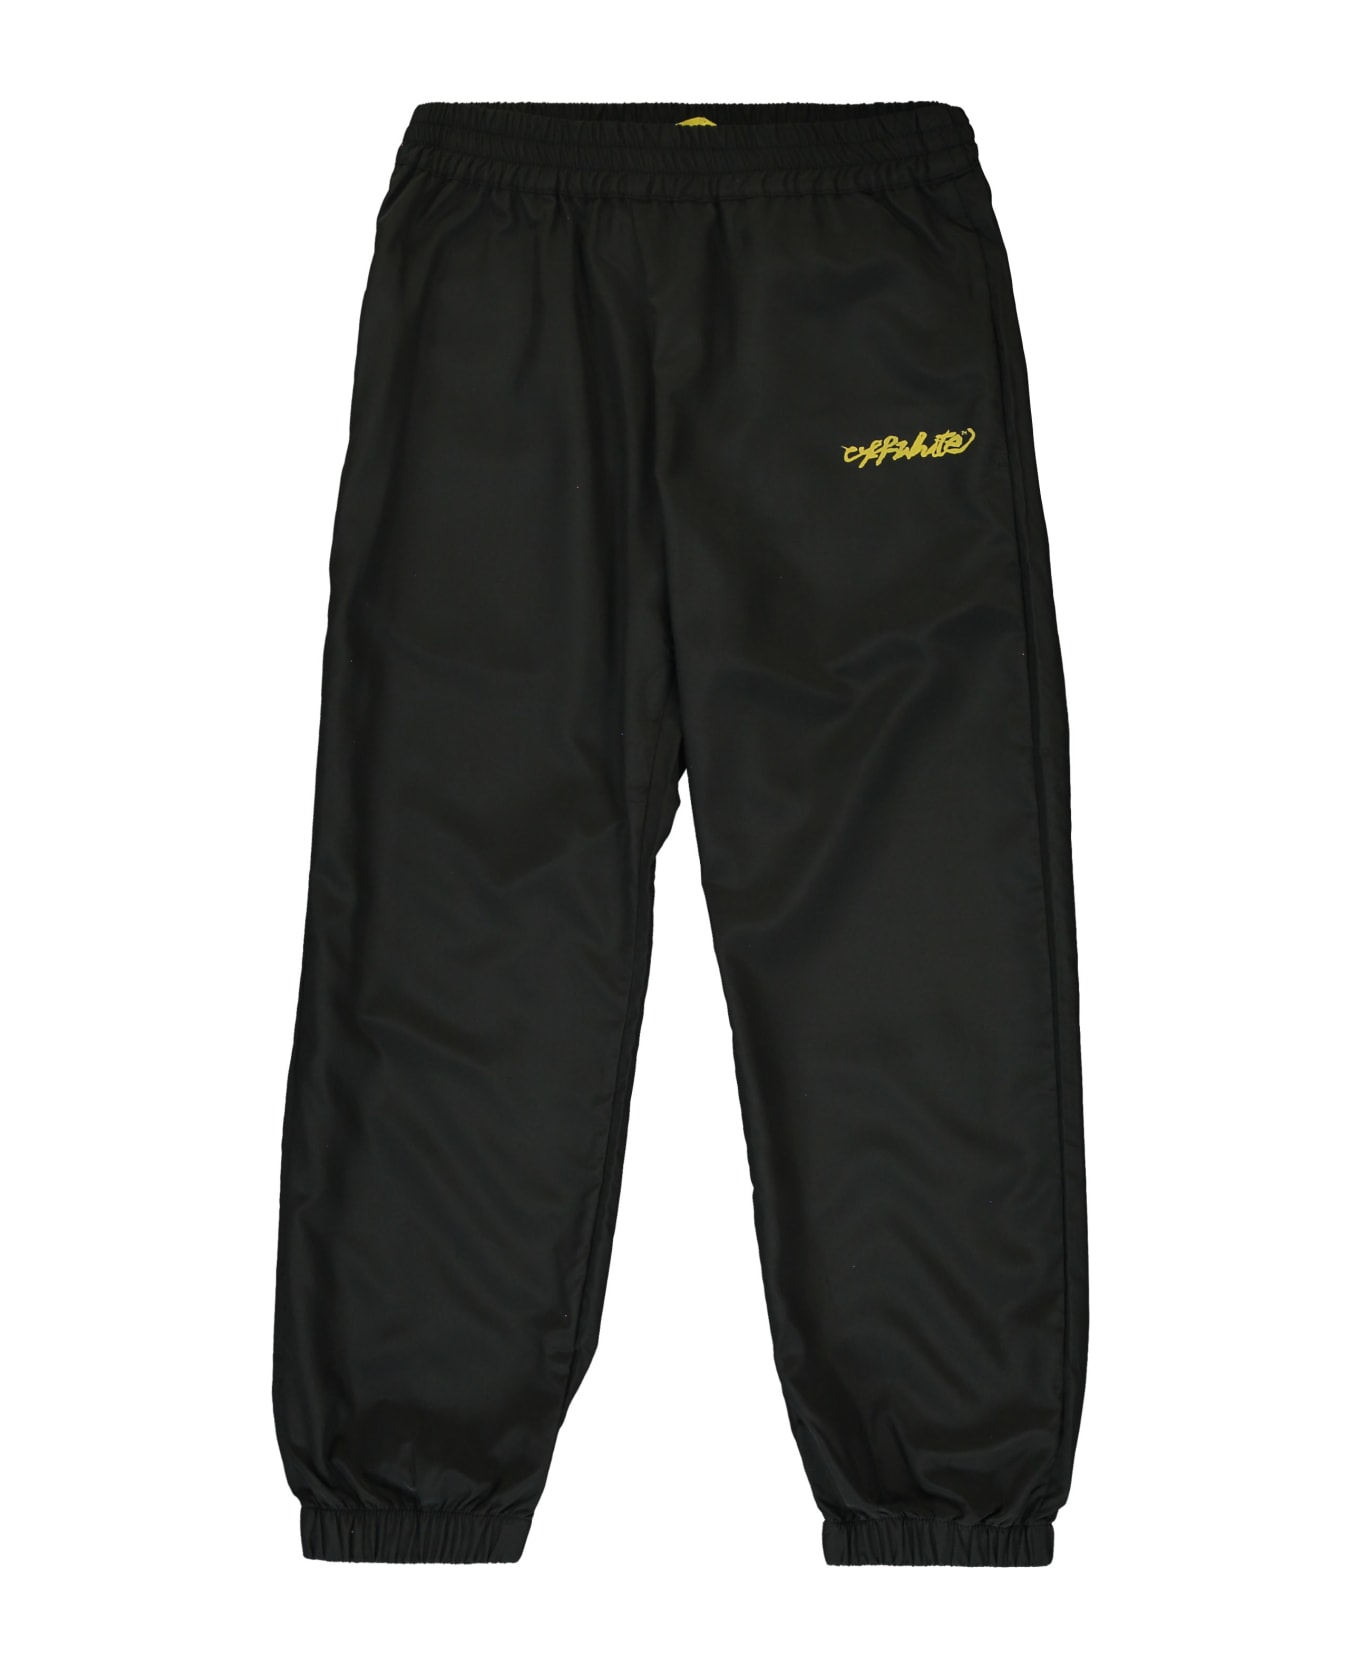 Off-White Technical Fabric Pants - black